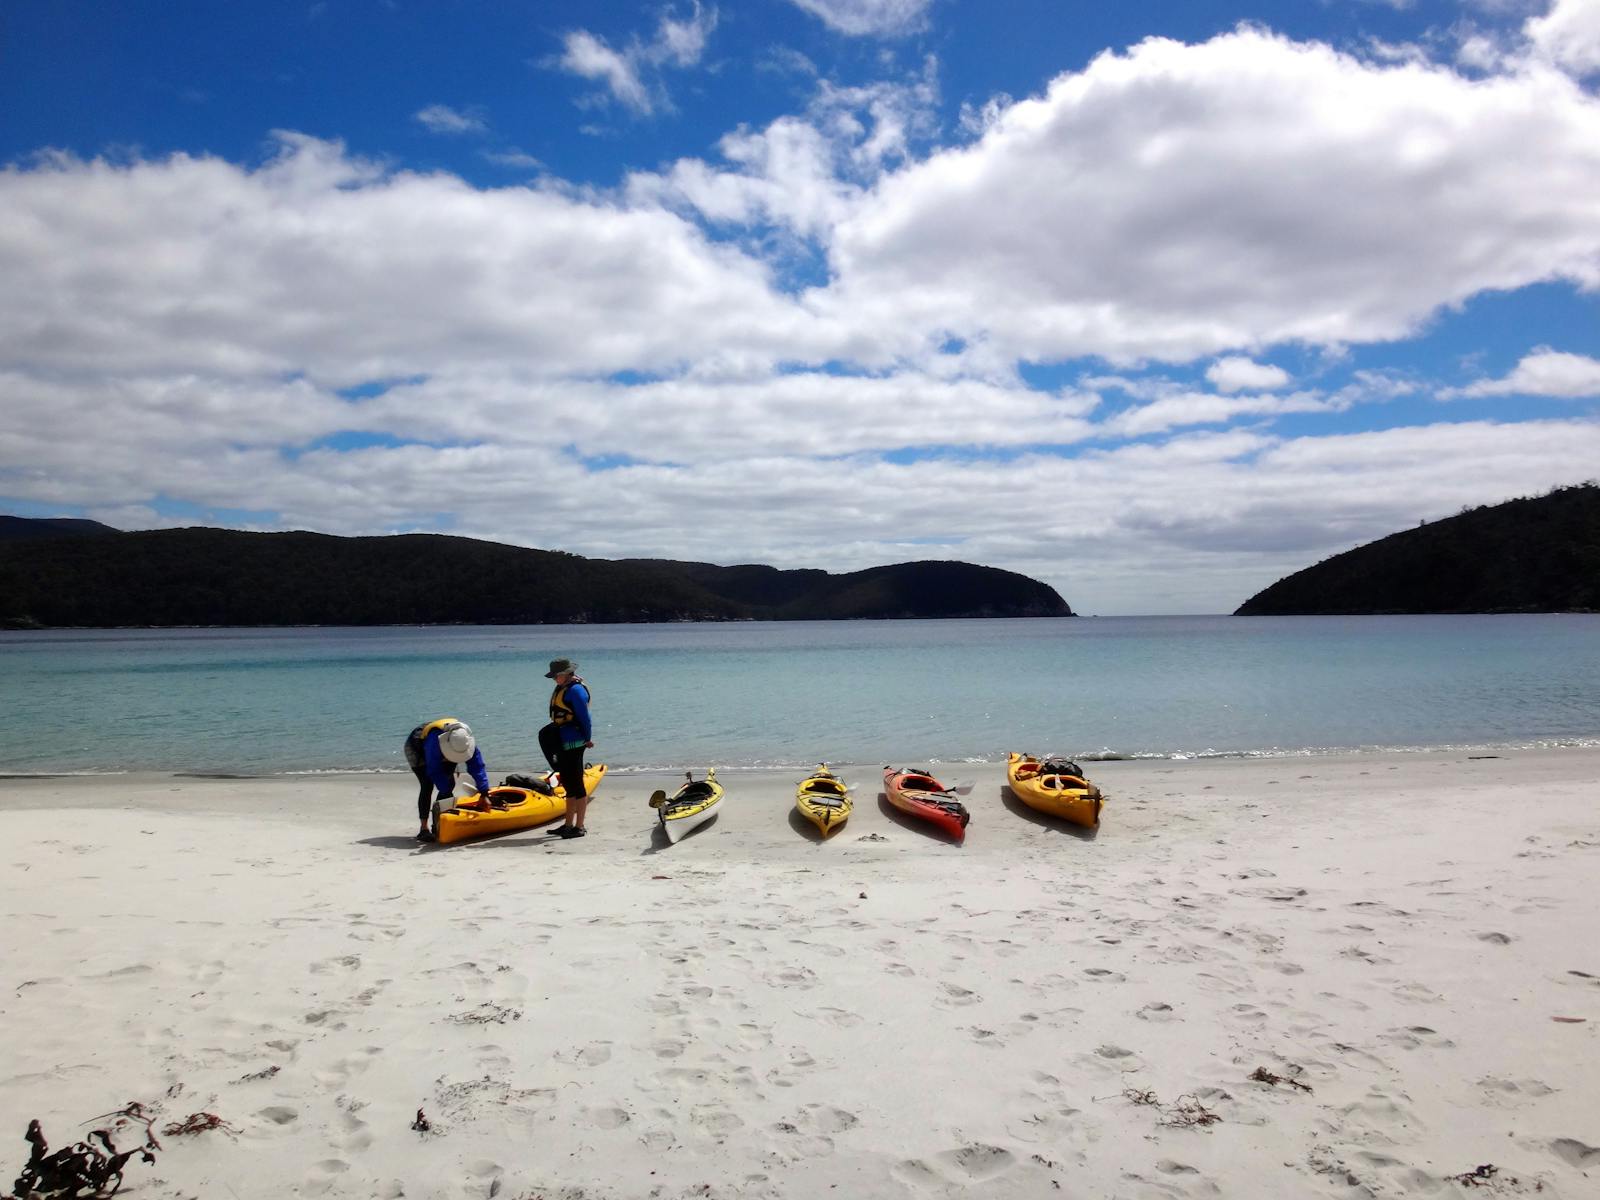 Ready to launch kayaks from Fortescue Bay beach on the Tasman Peninsula